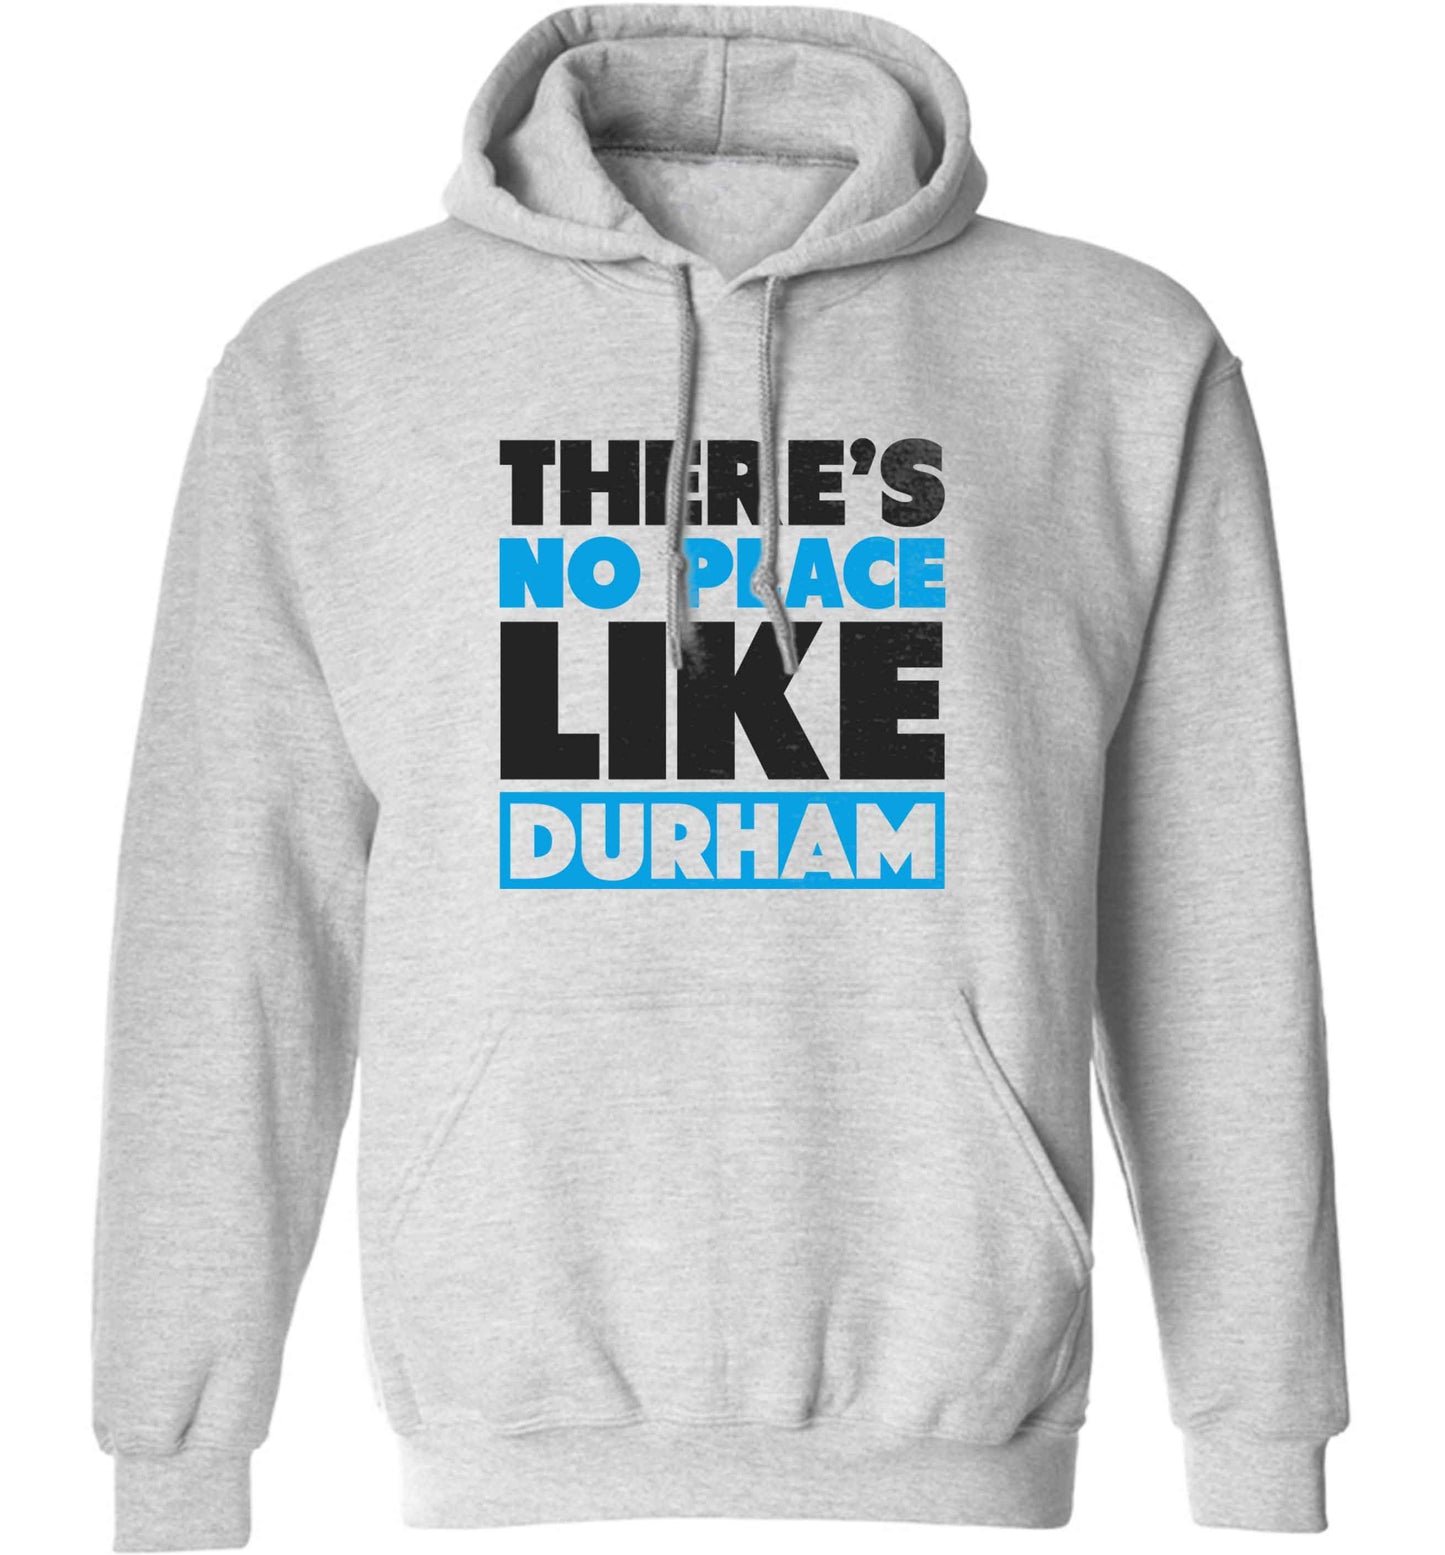 There's no place like Durham adults unisex grey hoodie 2XL